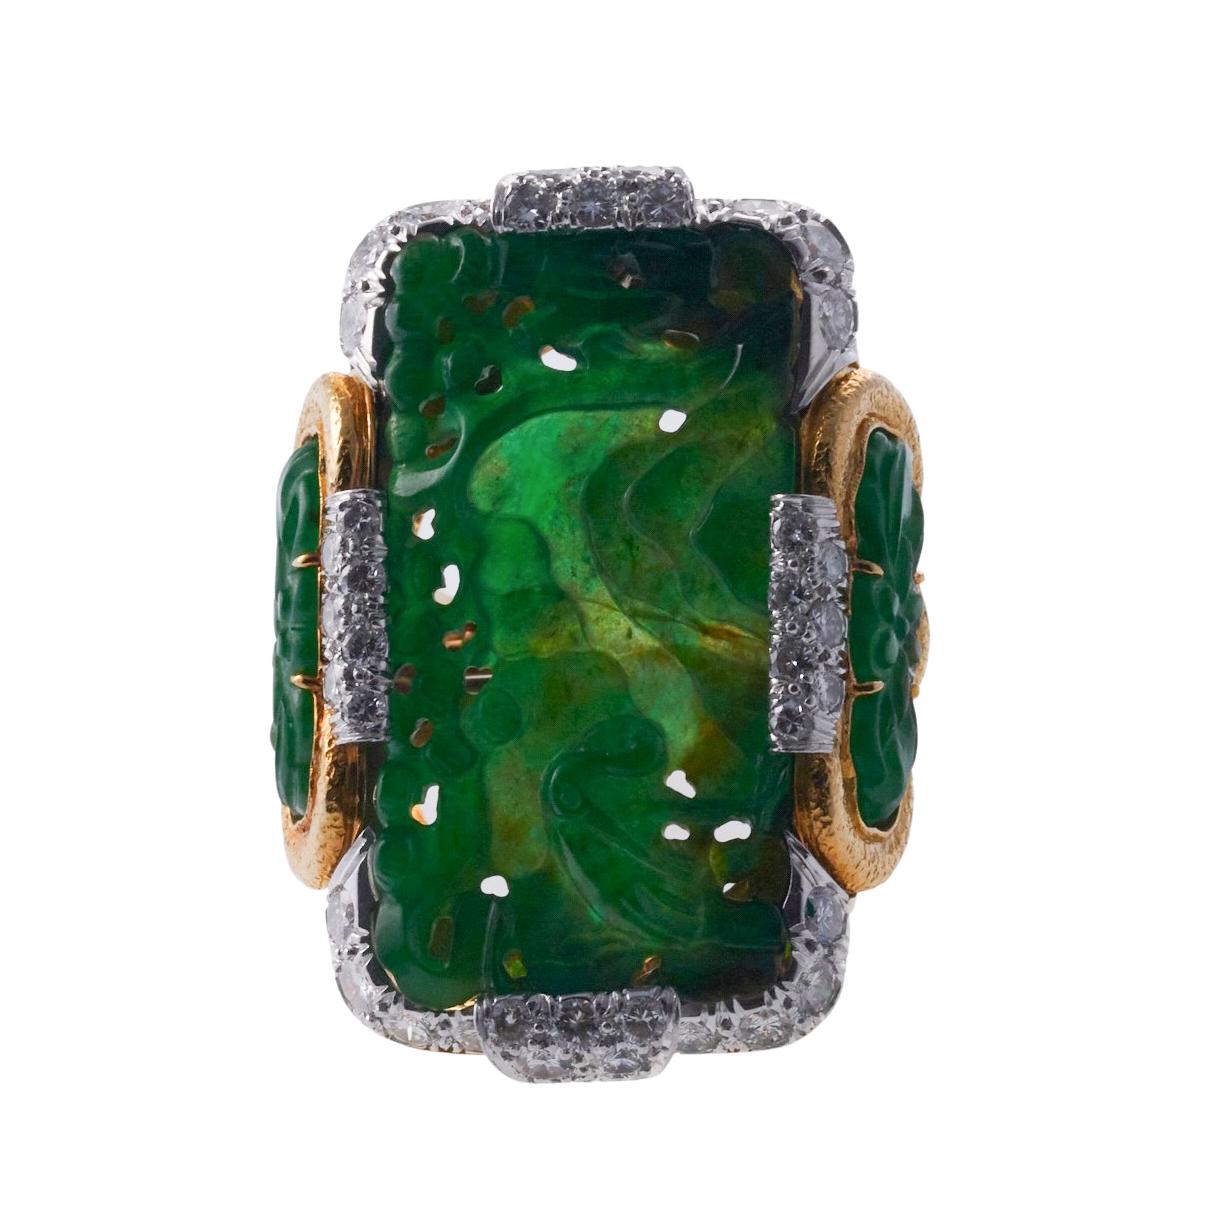 Vintage 18k gold and platinum ring by David Webb, set with carved jade and approx. 2.50ctw in VS-SI/H diamonds. Ring size 6-7 (with ring guard), top measures 38mm x 27mm. Marked: Webb, 18k, .plat. Weight is 37.2 grams. 